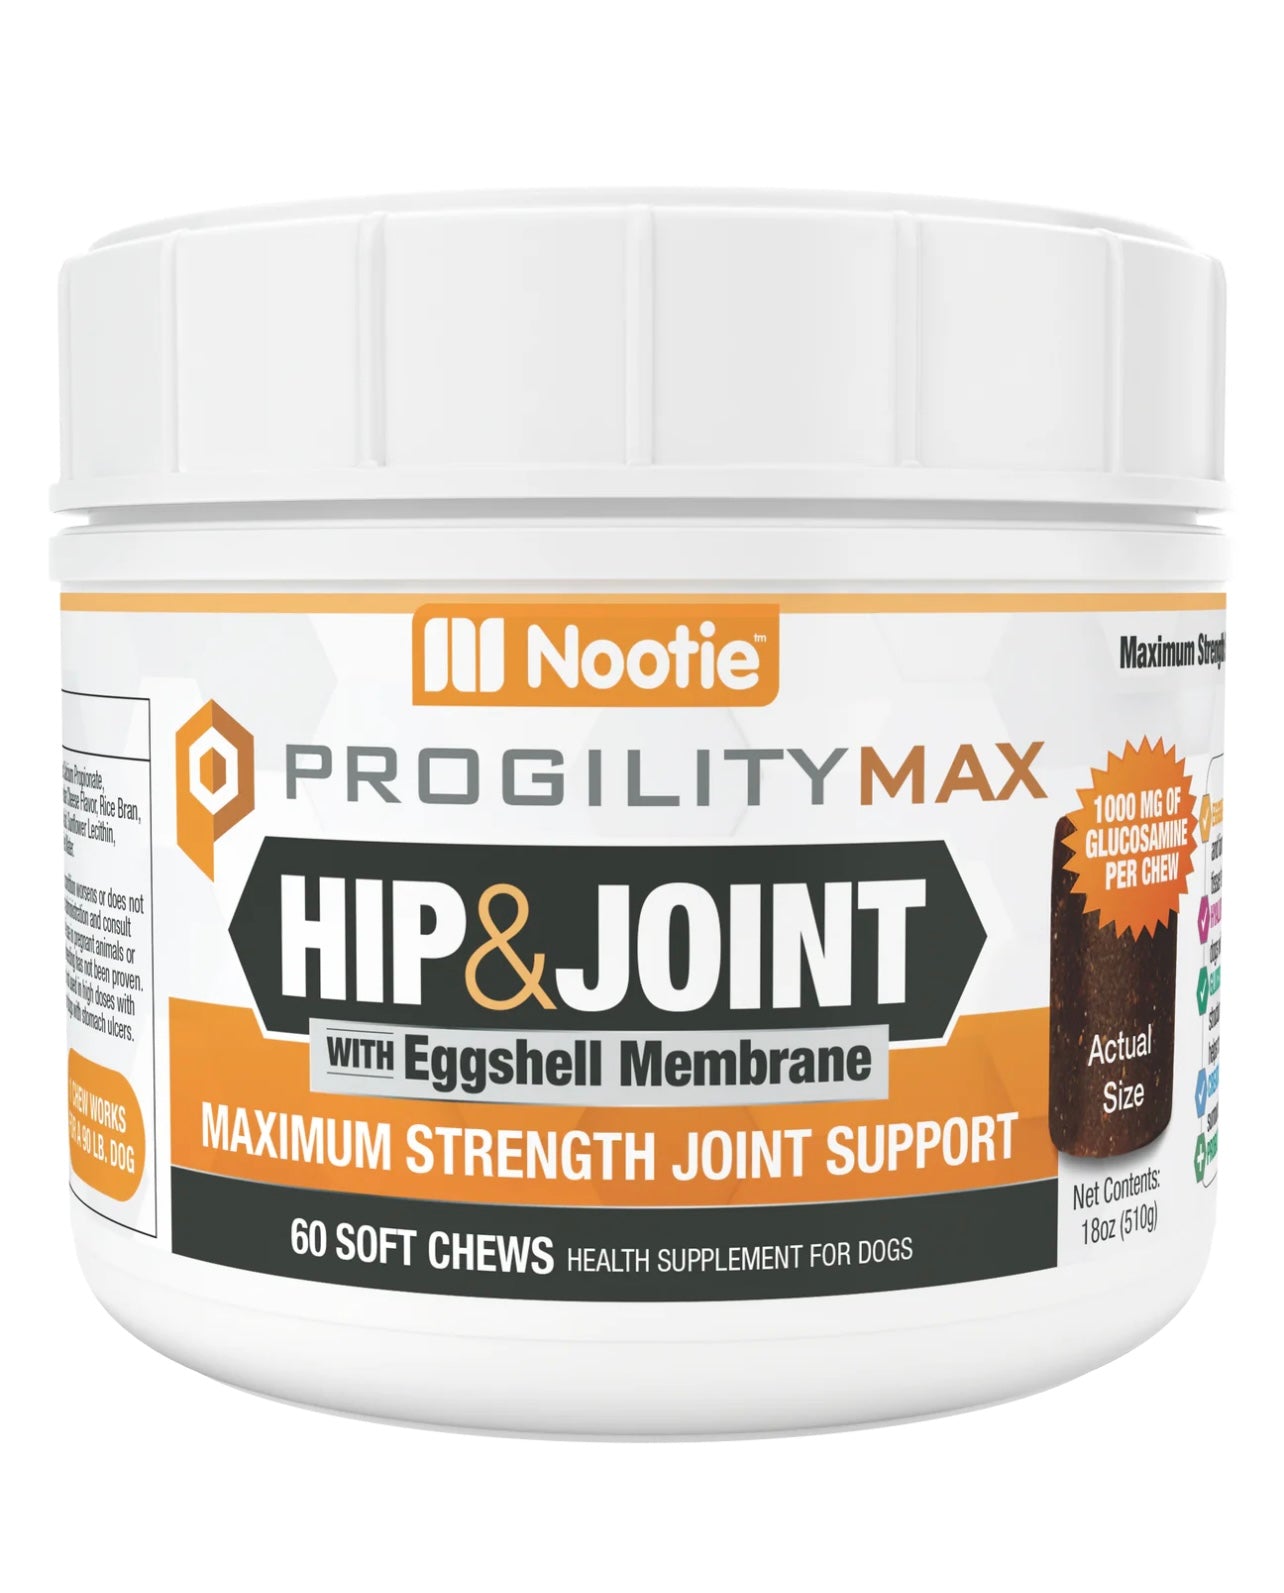 Progility MAX Hip Joint W/ Egg Shell Membrane 60ct